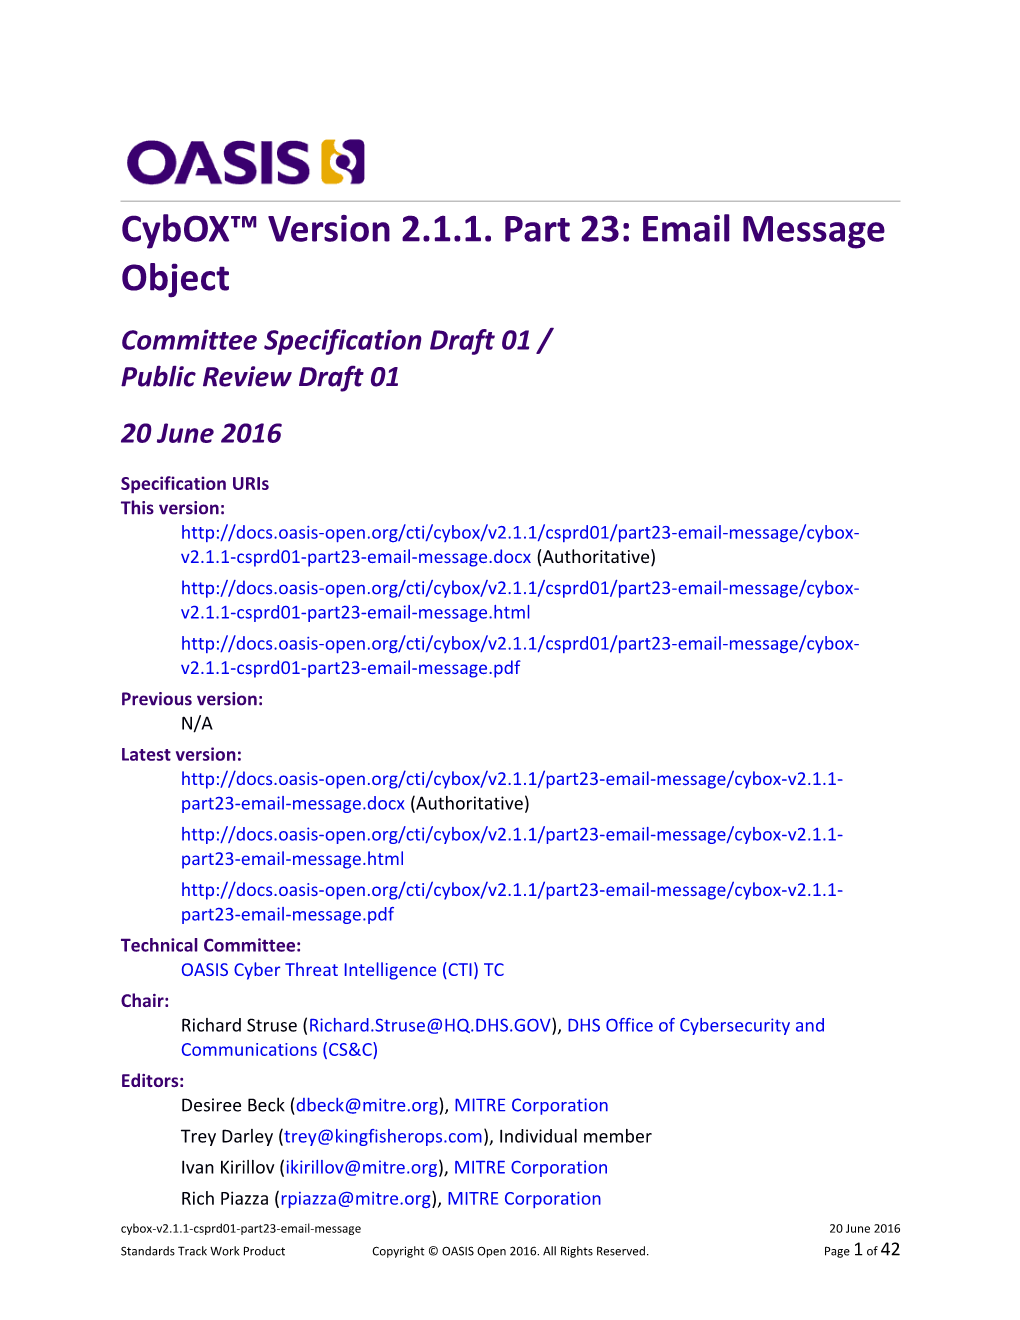 Cybox Version 2.1.1. Part 23: Email Message Object